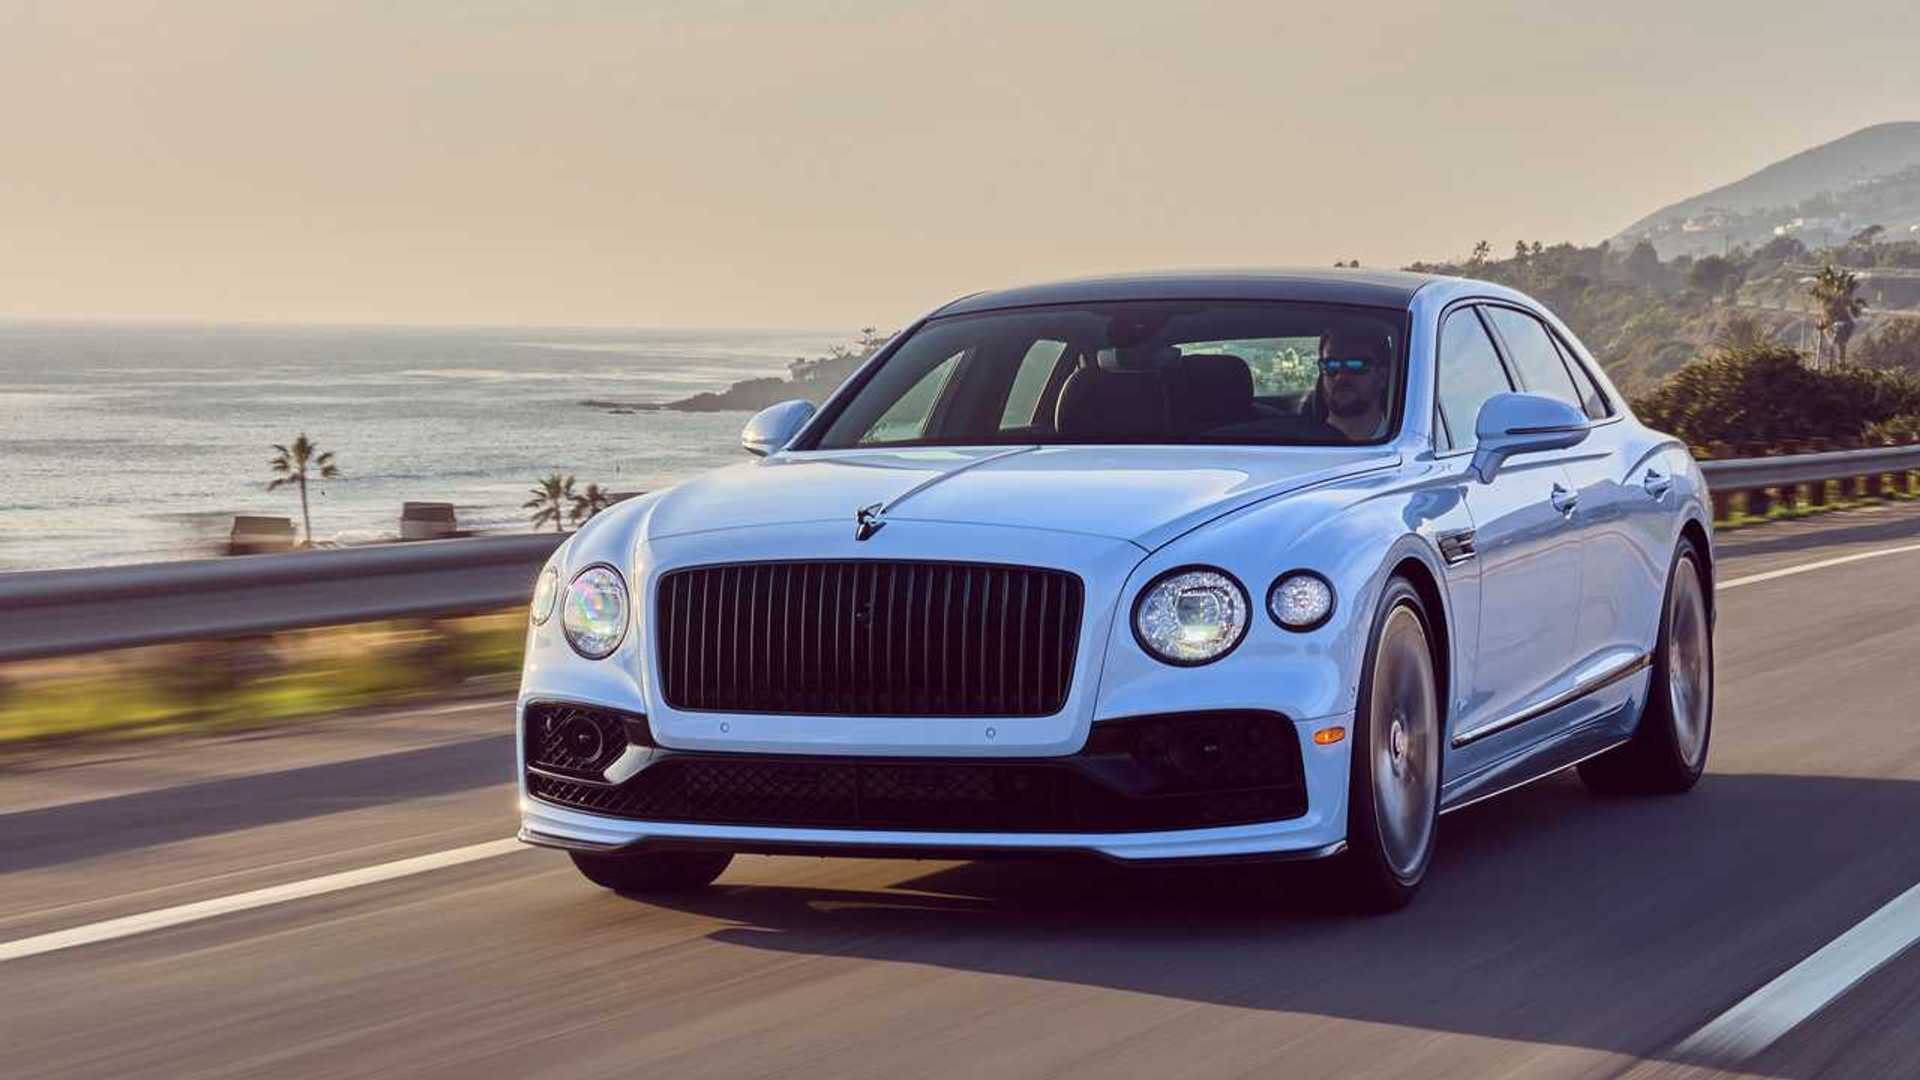 2022 Bentley Flying Spur Hybrid First Drive Review: Don't Fear The Reaper